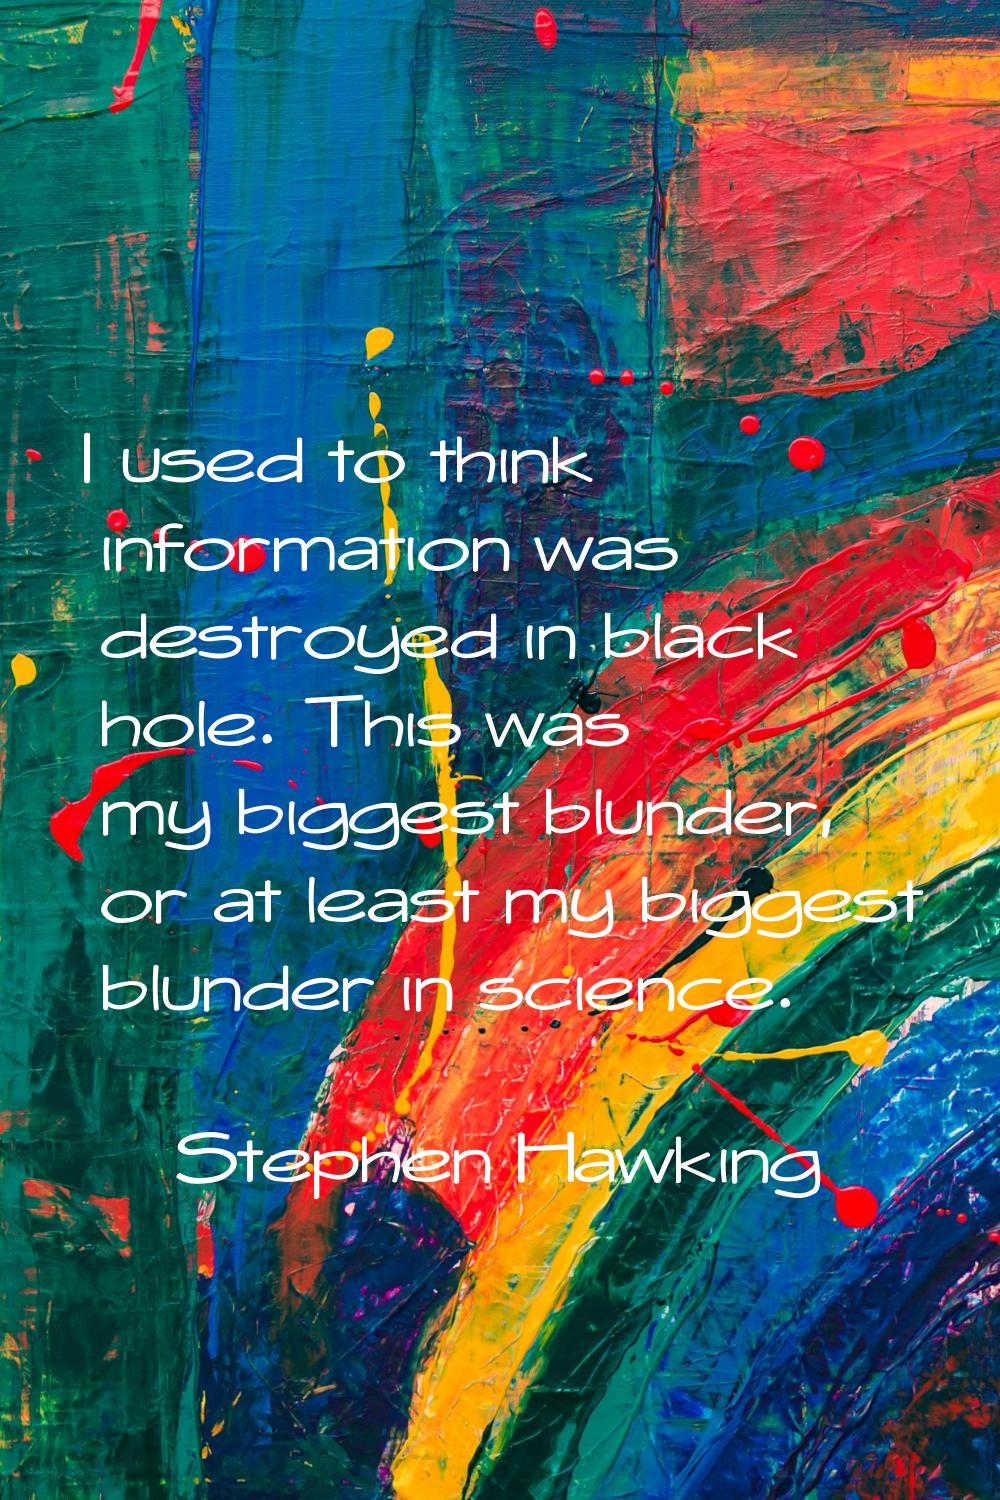 I used to think information was destroyed in black hole. This was my biggest blunder, or at least m